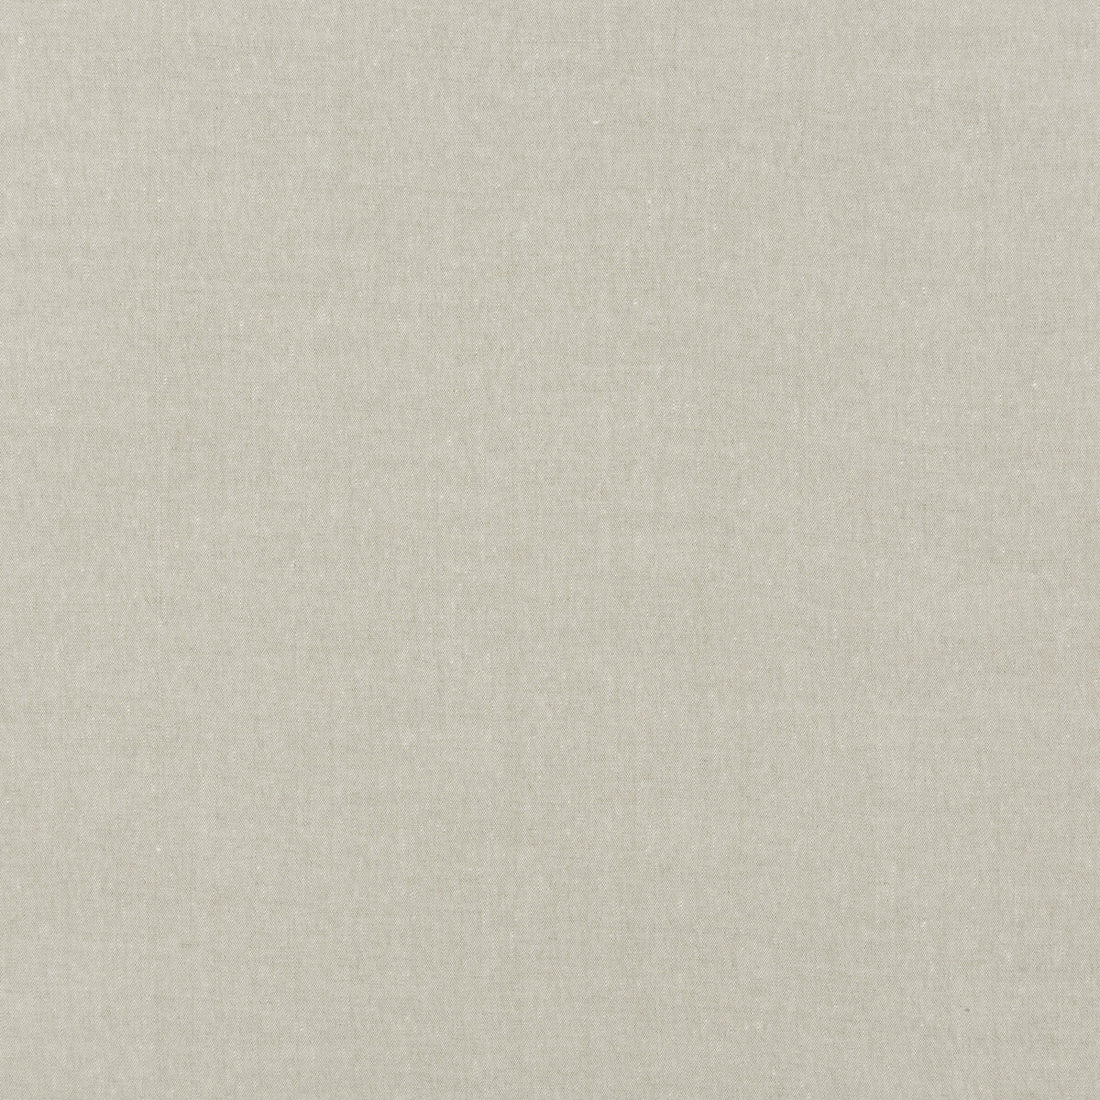 Meridian Linen fabric in marble color - pattern ED85281.106.0 - by Threads in the Meridian collection